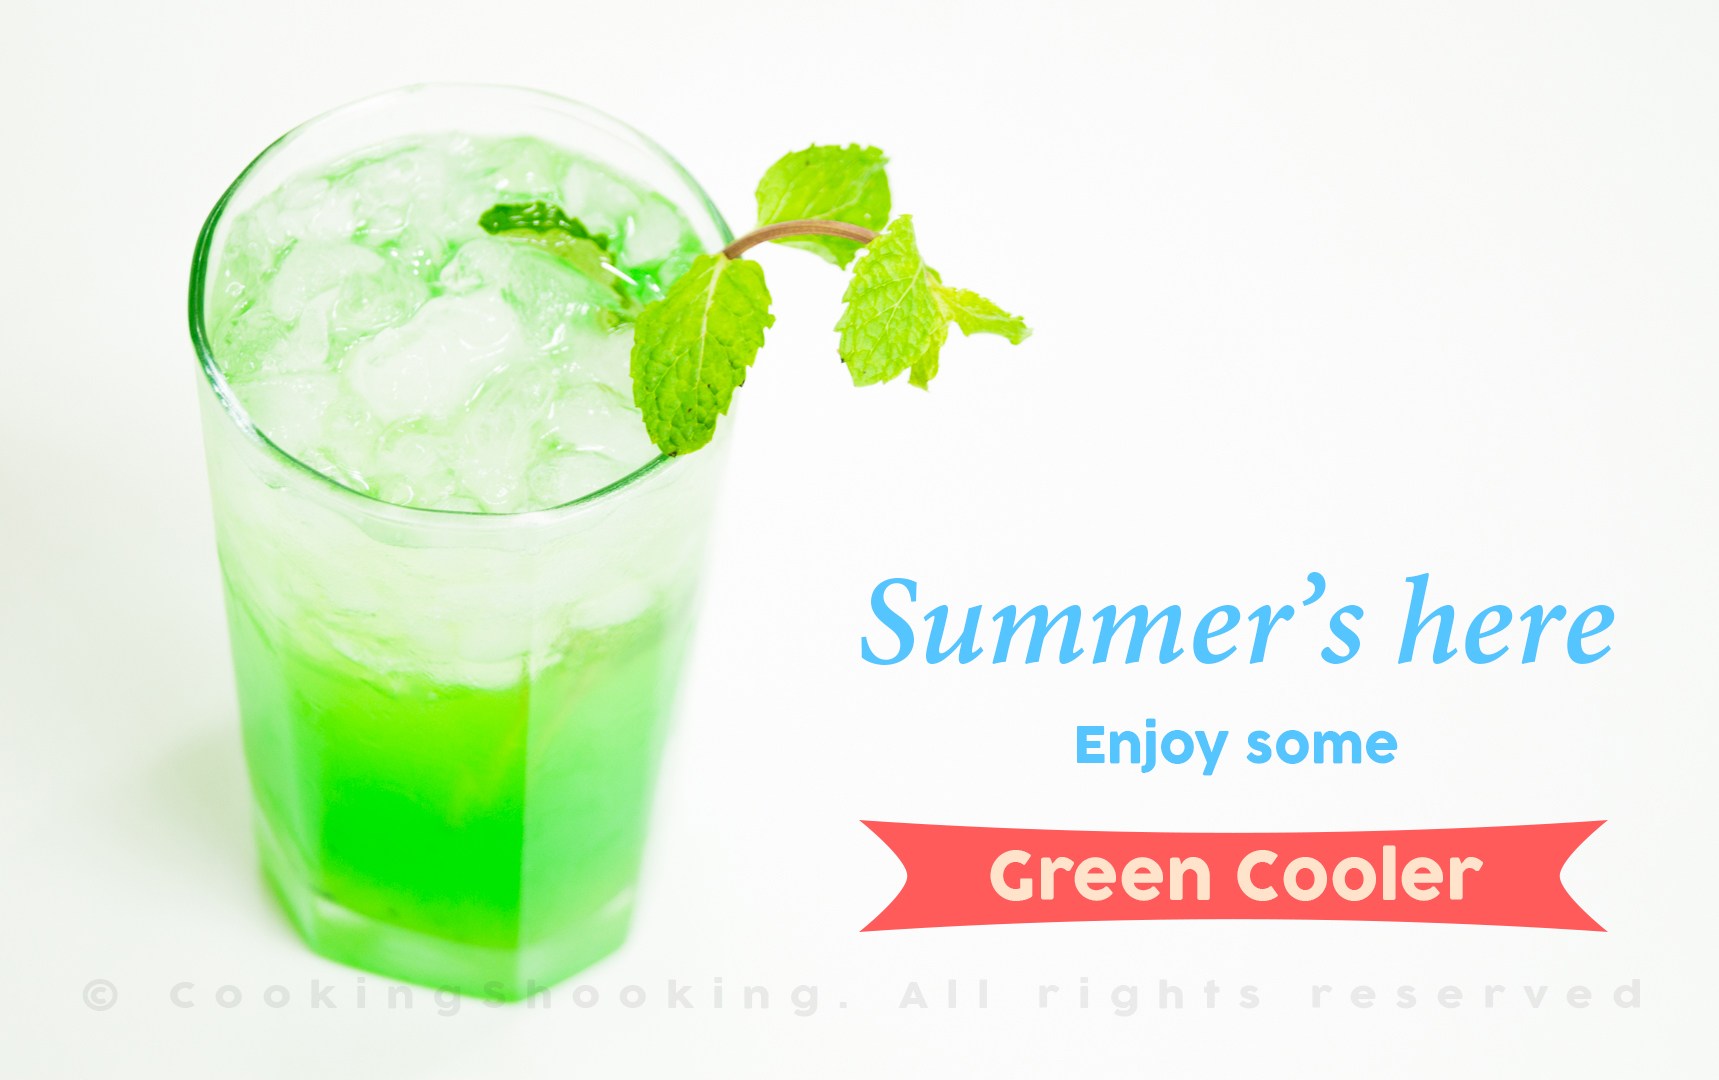 Green Cooler Mocktail Recipe | Quick, Easy & Refreshing Indian Style Summer Drink